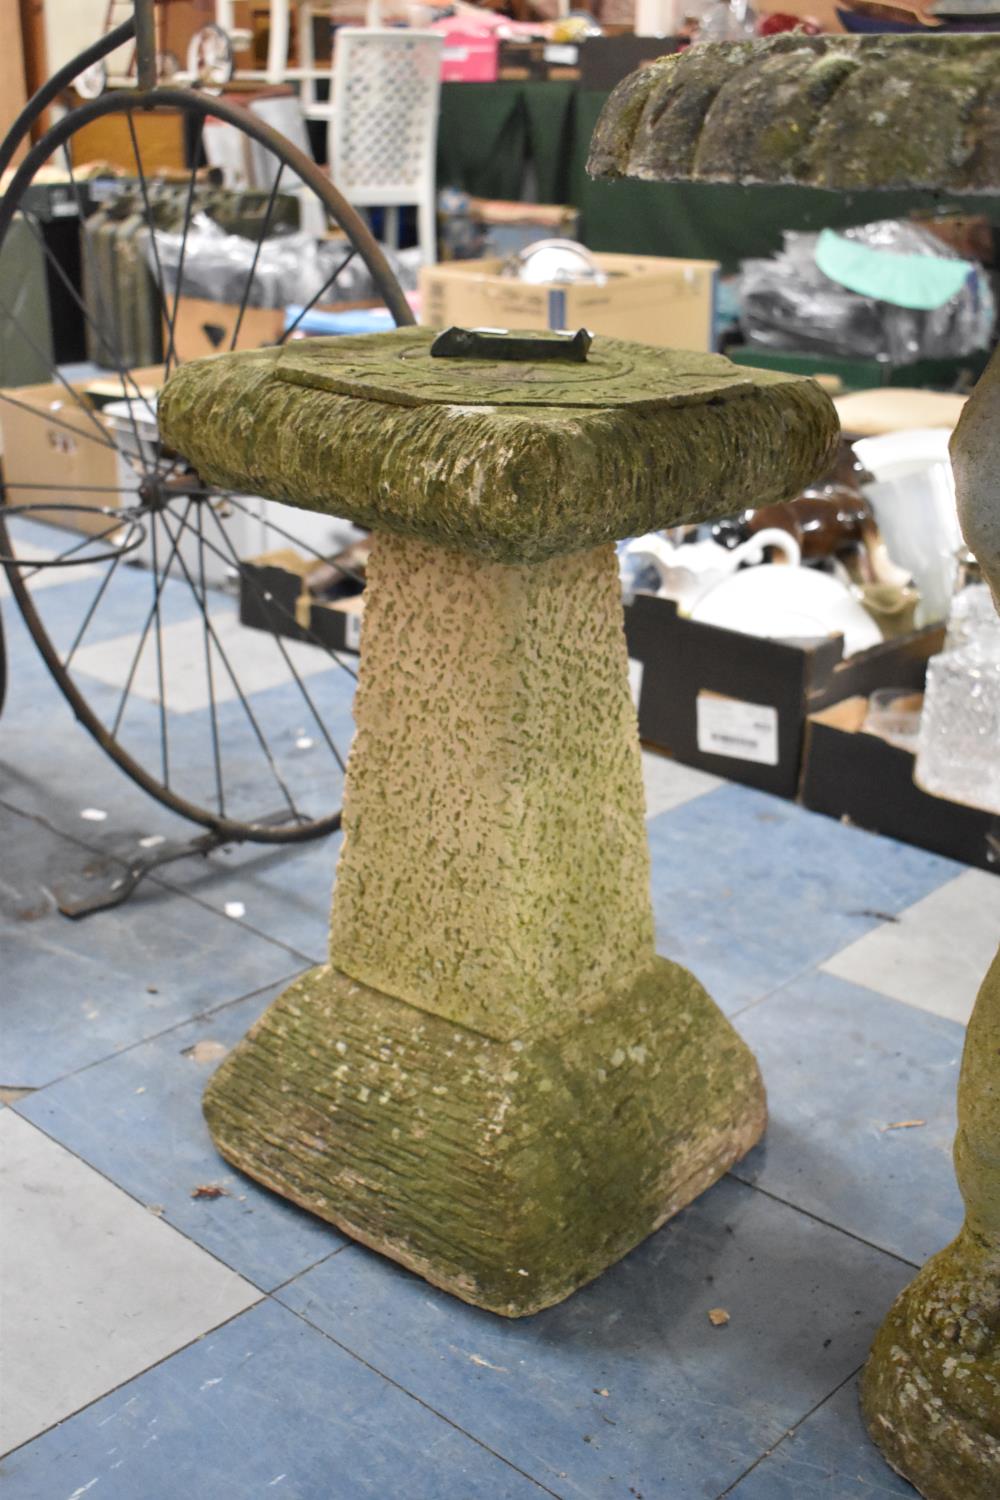 A Reconstituted Stone Garden Sundial on Plinth, Gnomon Broken, 30cm Square and 55cm high